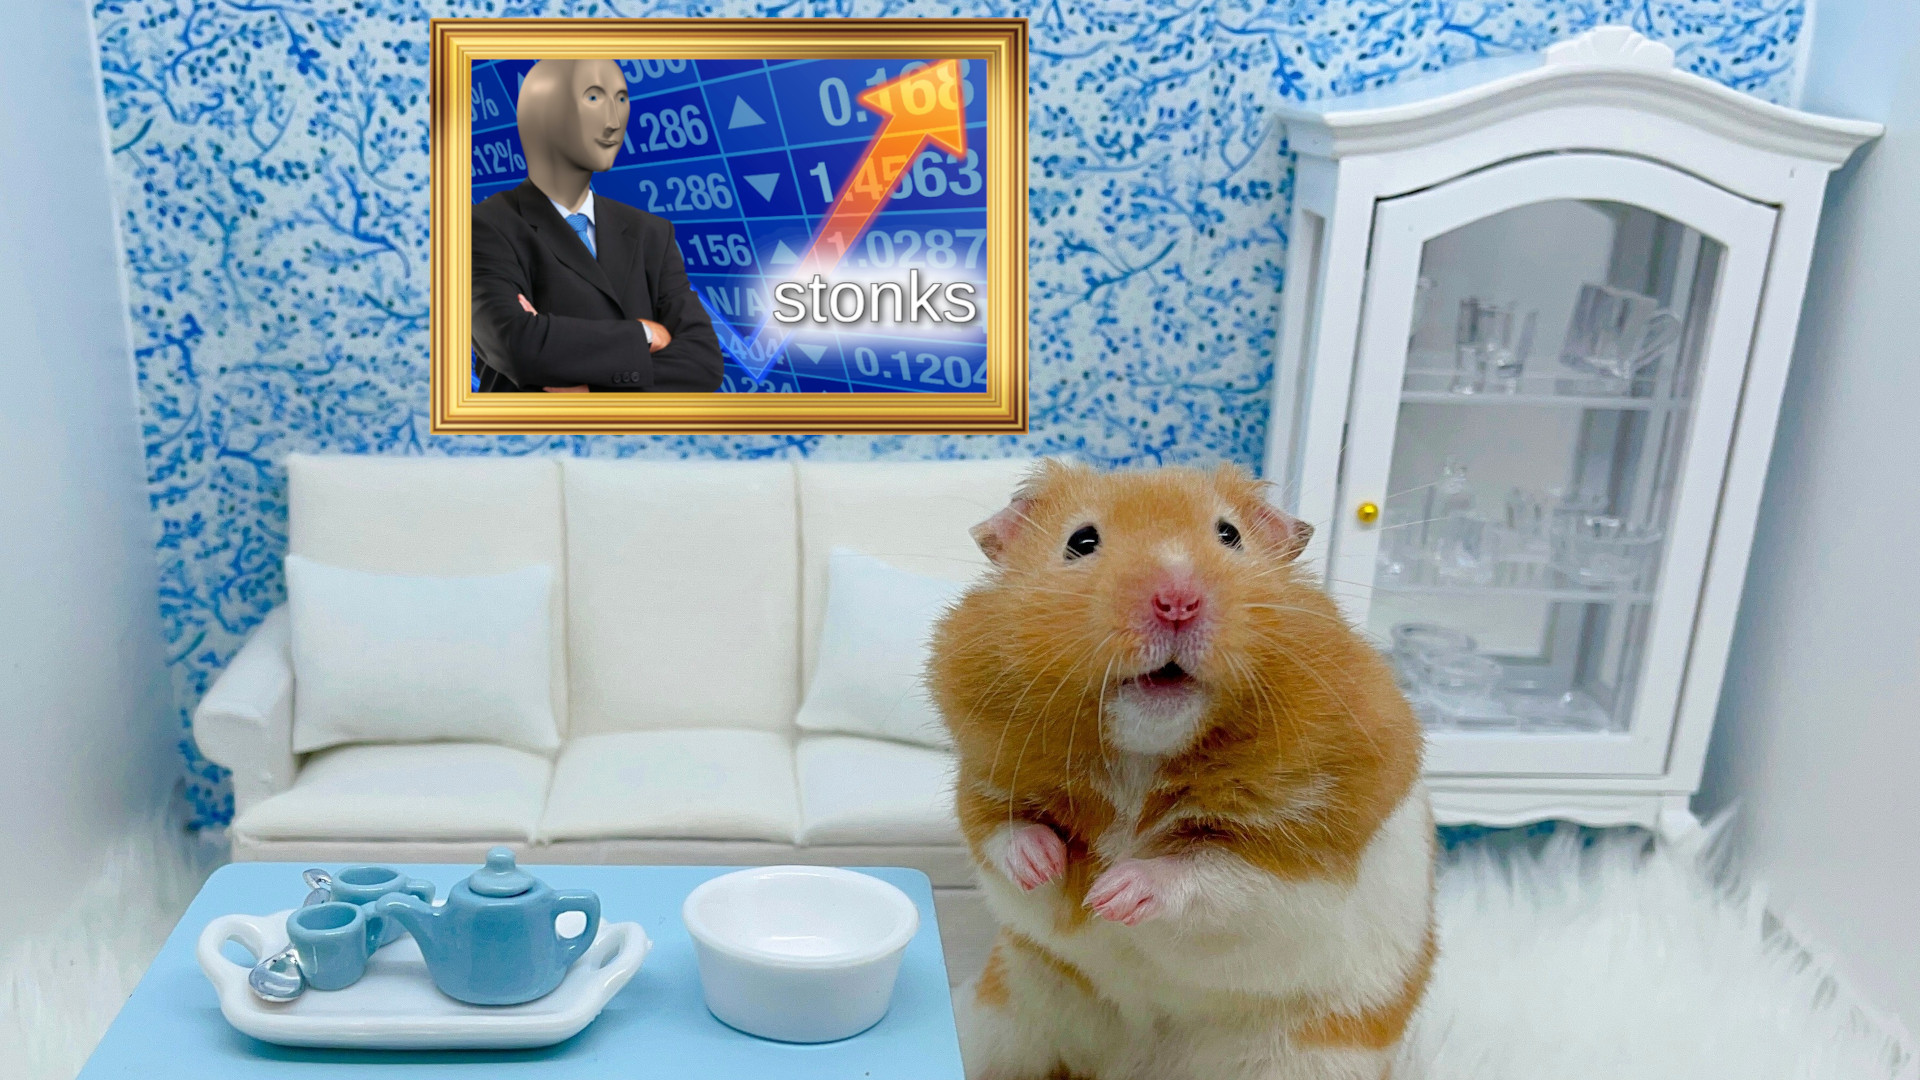 This Crypto trading hamster is outperforming Warren Buffet TechRadar